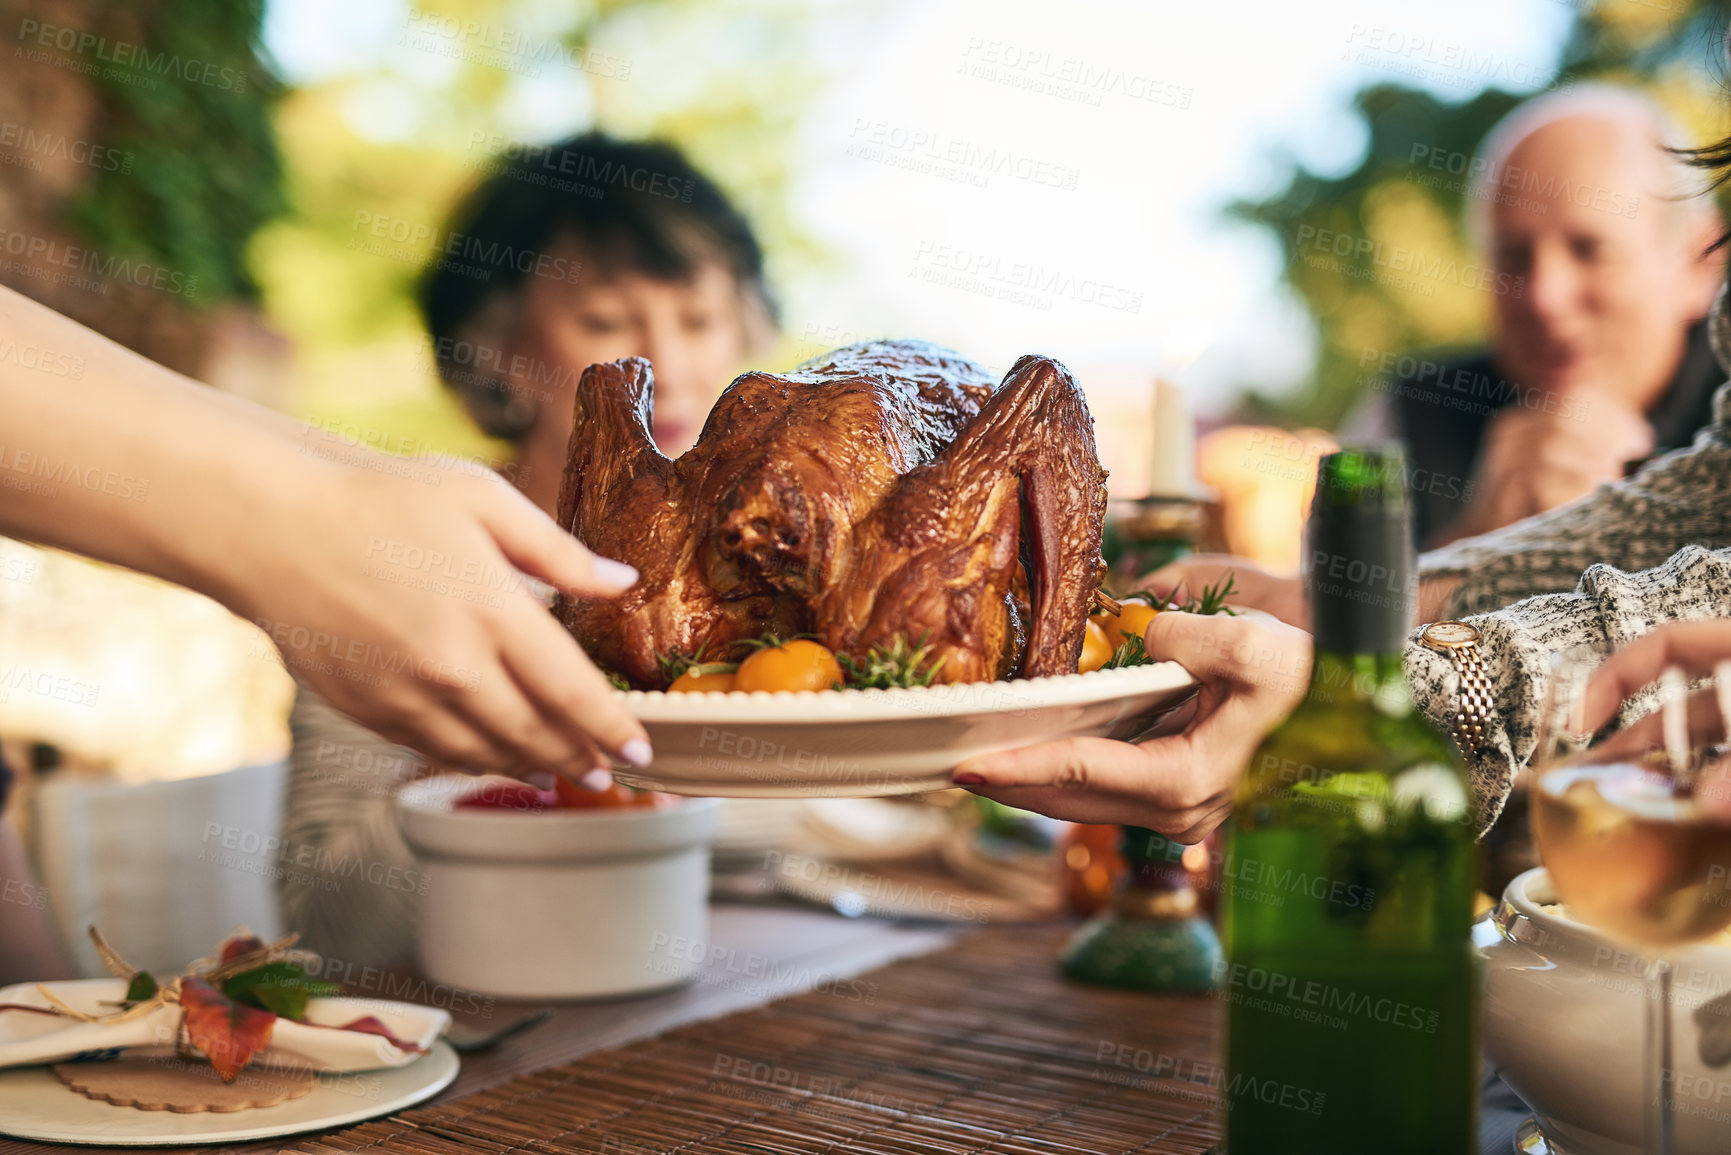 Buy stock photo Thanksgiving, turkey and hands with a family eating a meal outdoor together in celebration of tradition. Christmas, chicken and party with a man and woman group enjoying dinner while bonding